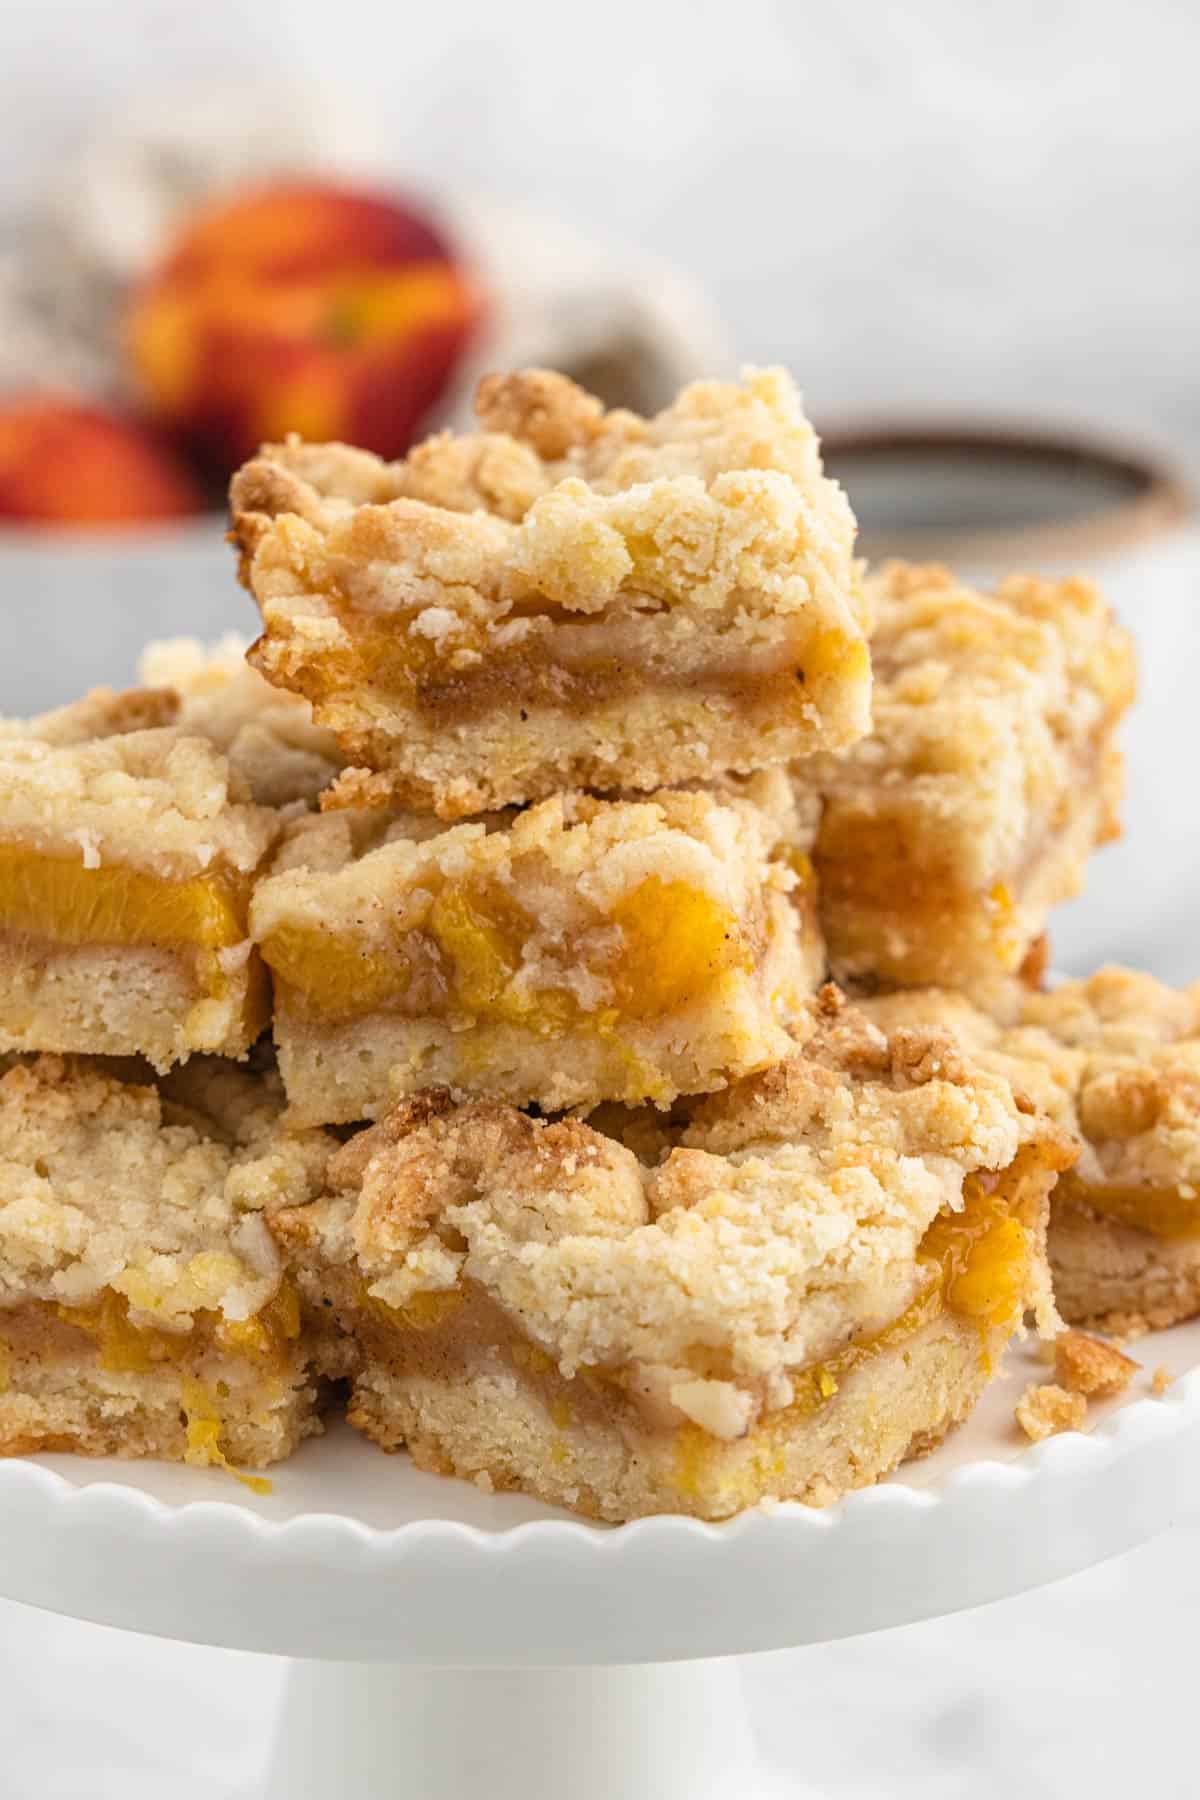 Homemade peach crumb bars cut and stacked on a white plate.